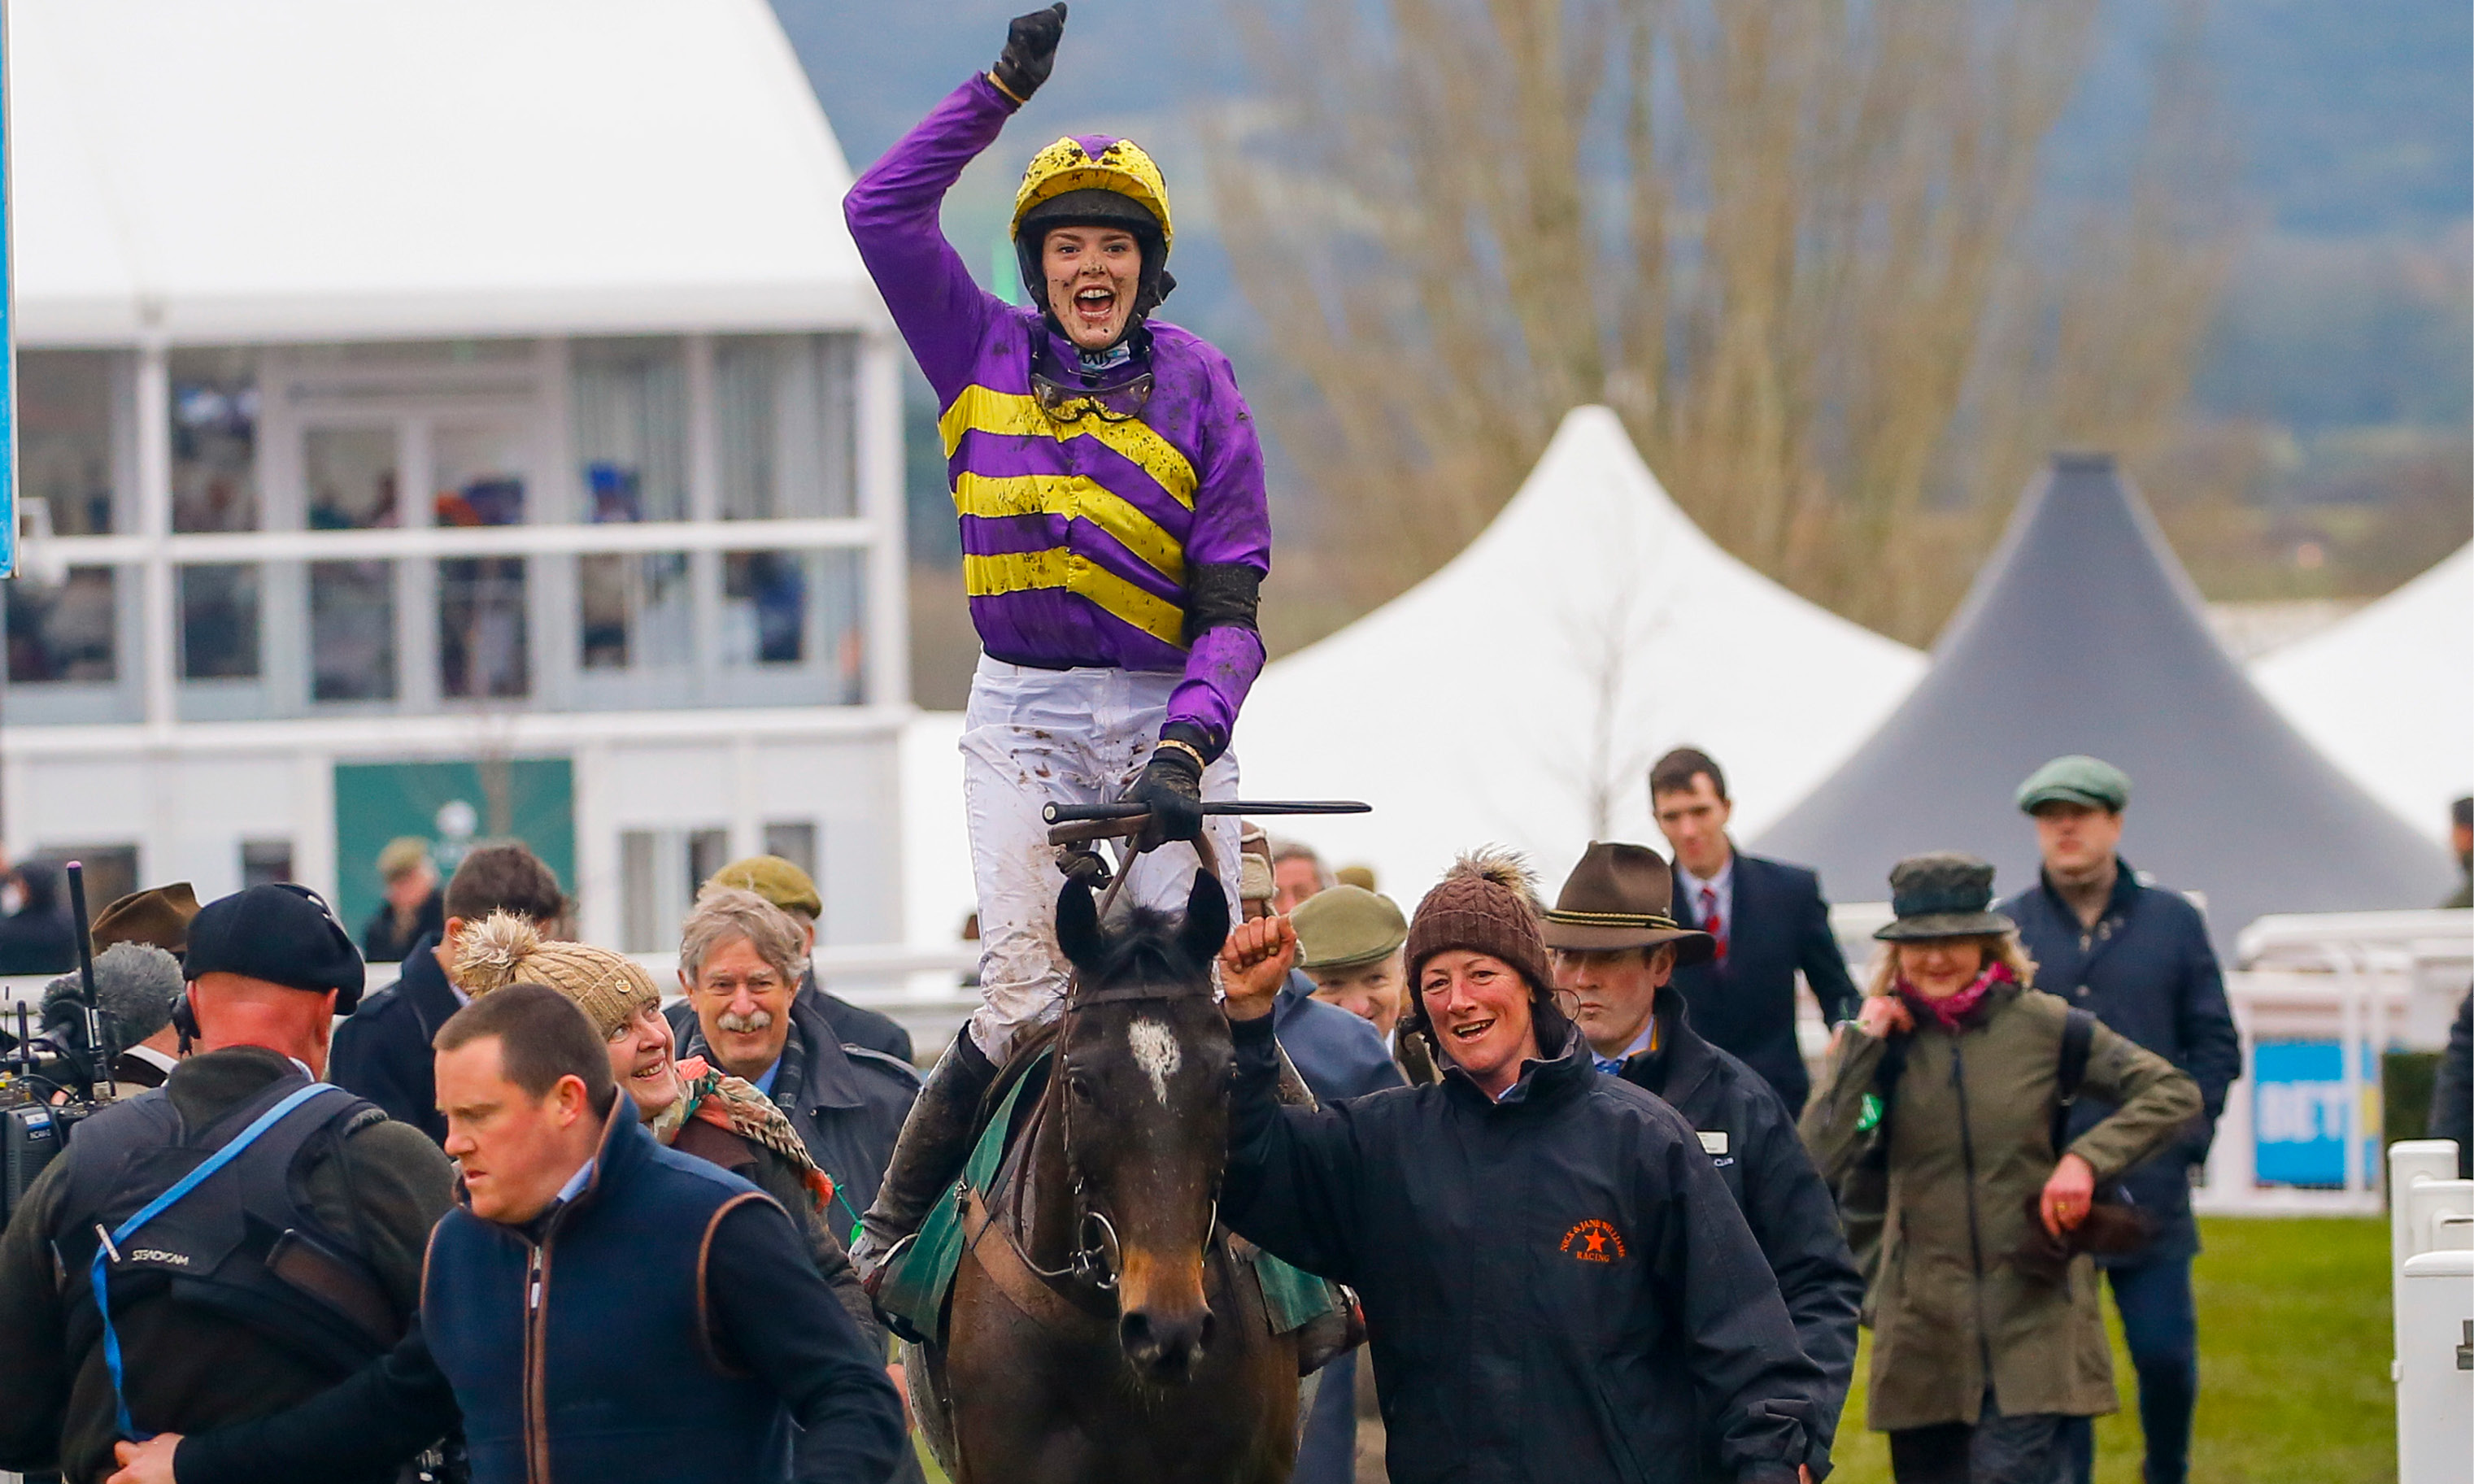 A teen has become the first UK jockey to compete - and win 